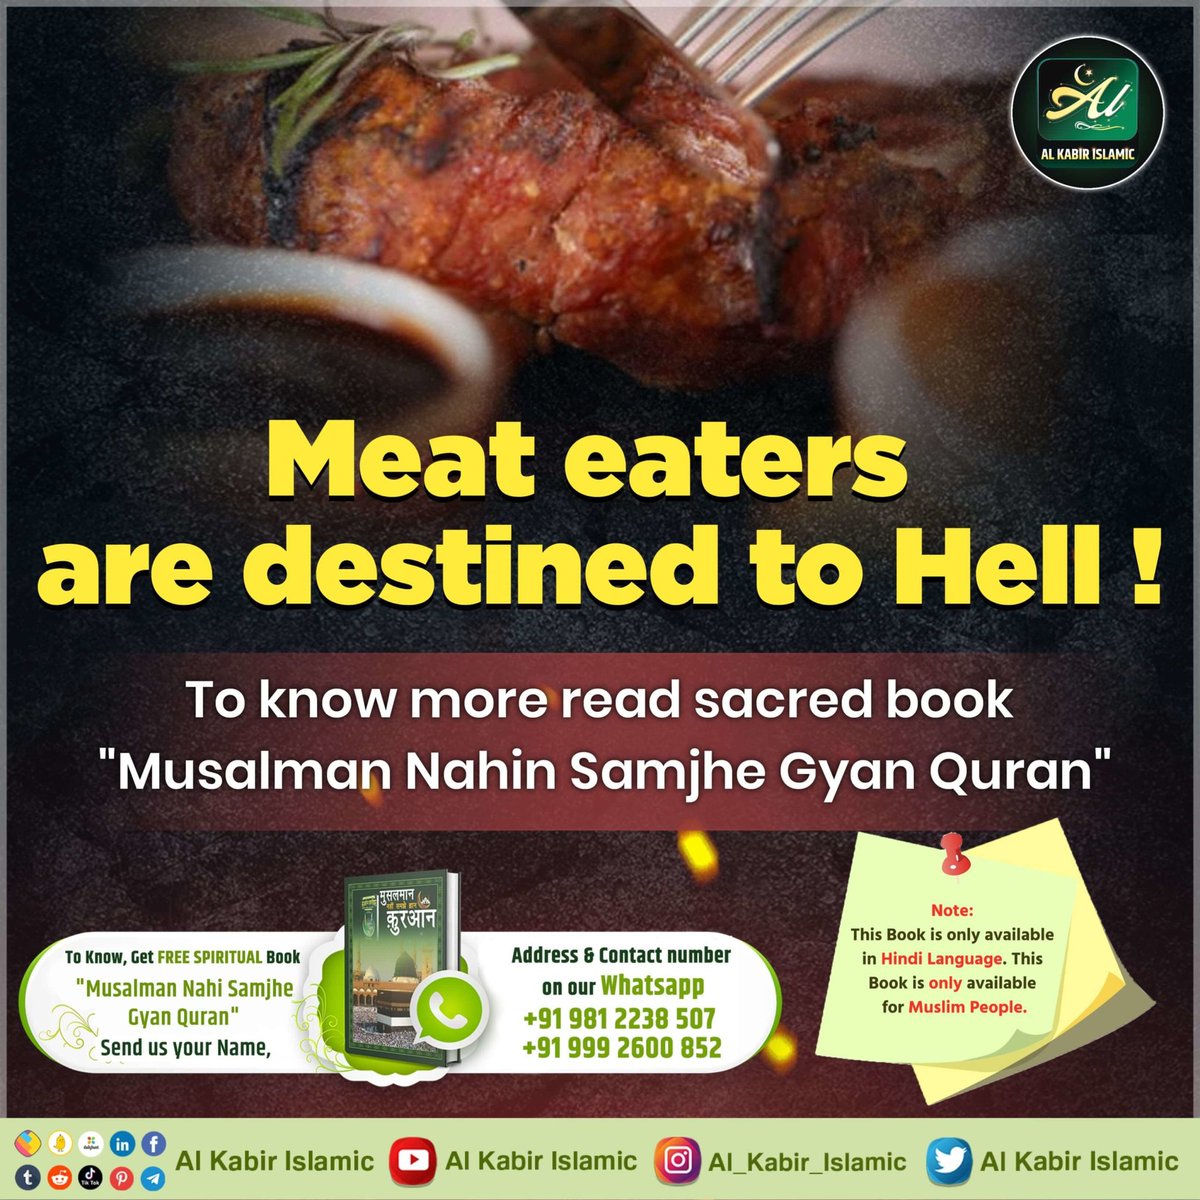 #ThursdayMorning 
#GodMorningThursday 
#रहम_करो_मूक_जीवों_पर Parmeshwar Kabir Sahib condemned the eating of meat by both Muslims and Hindus. Get the free holy book “'Musalman Nahi Samjhe  Gyan Quran” to know more. 
Sant RampalJi YouTube Channel